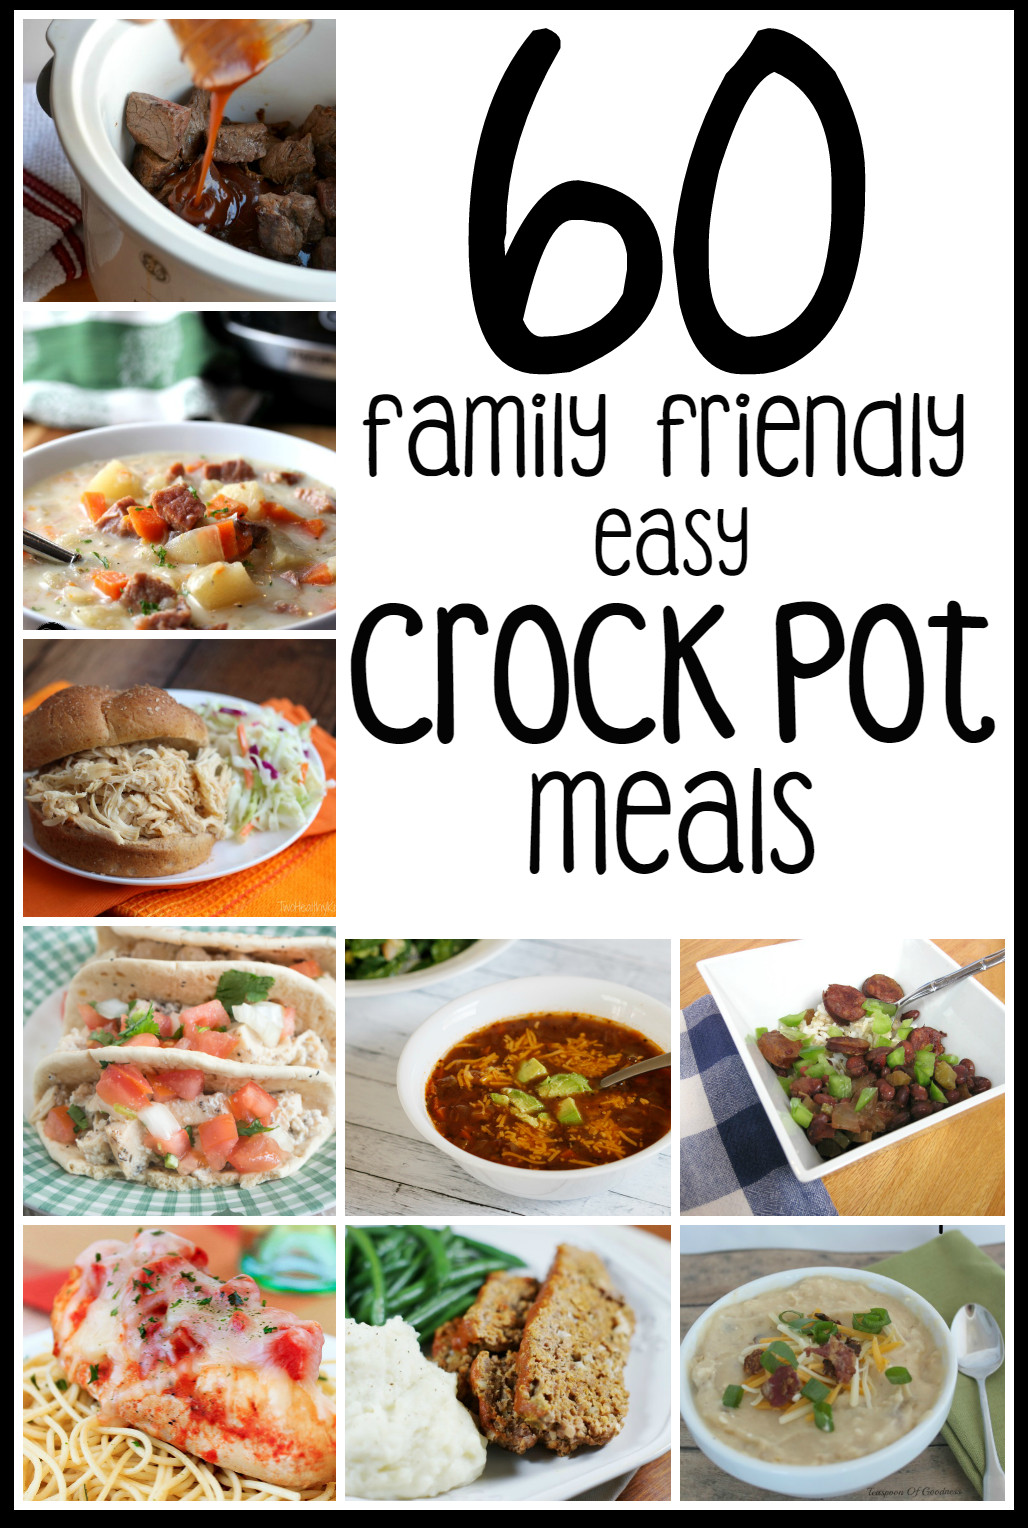 Healthy Kid Friendly Crock Pot Recipes
 60 Family Friendly Easy Slow Cooker Meals